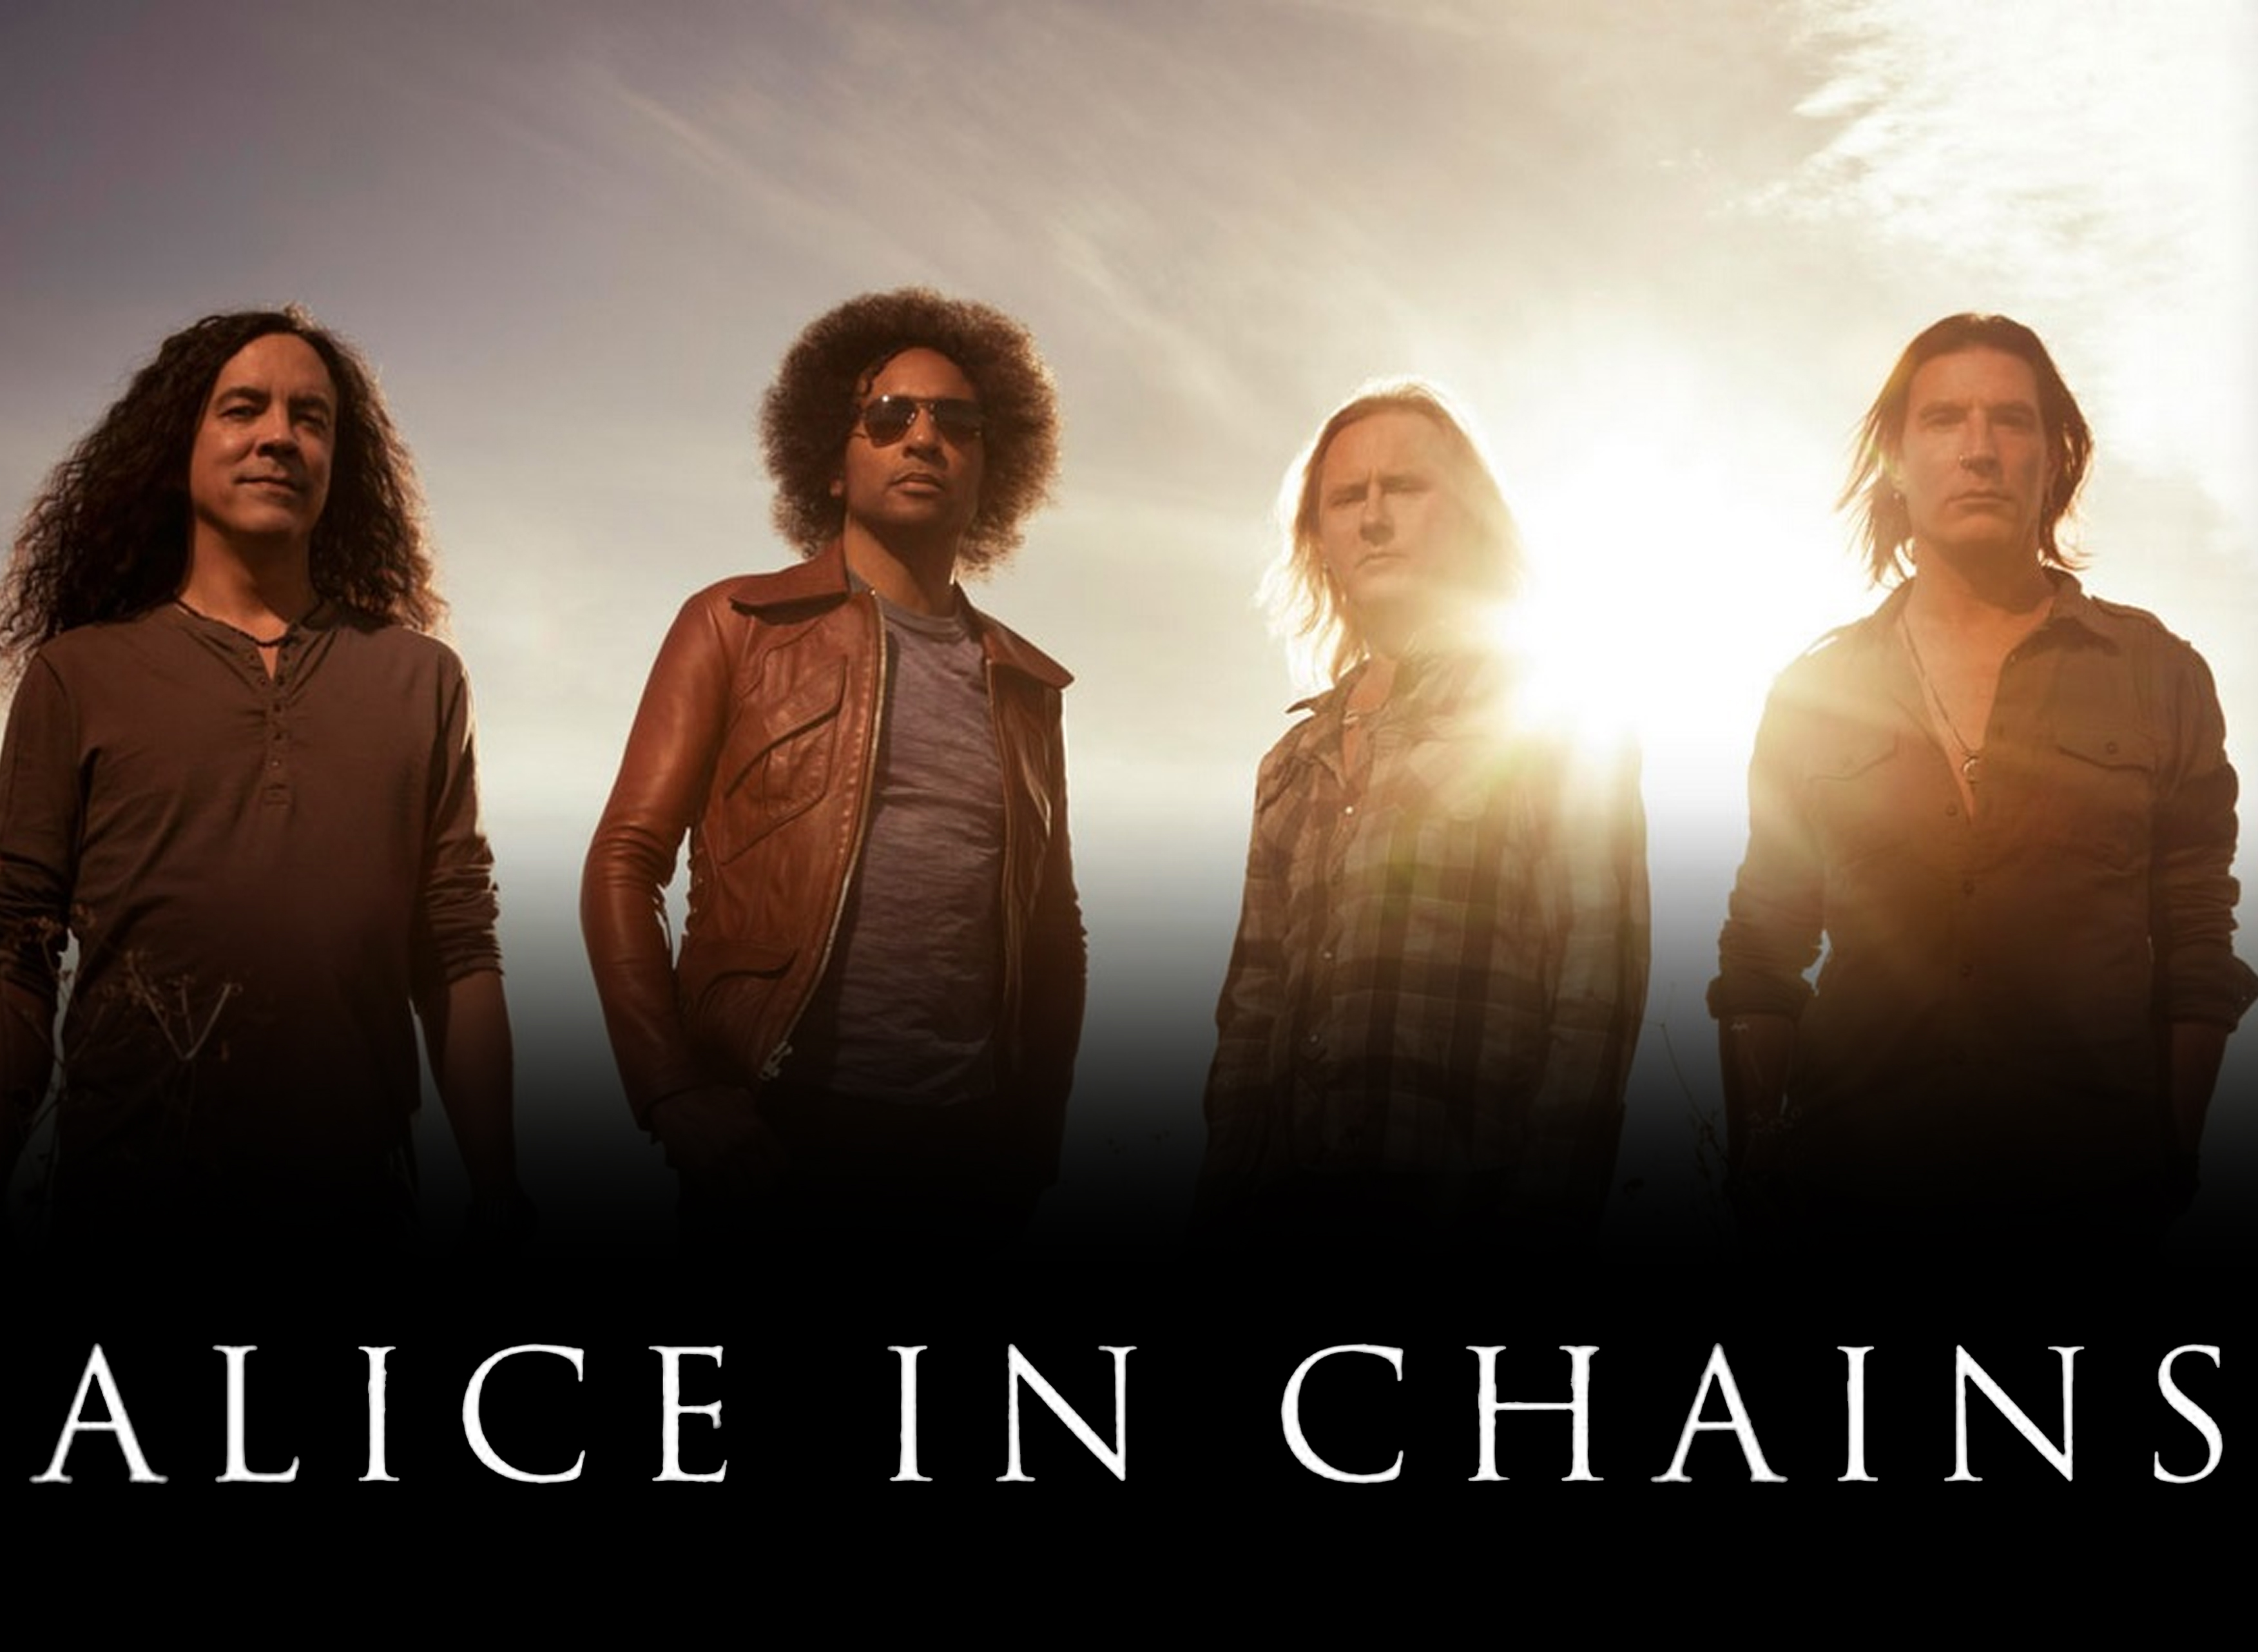 ALICE IN CHAINS TO HEADLINE MUSIKFEST ON AUGUST 16 IN BETHLEHEM, PA